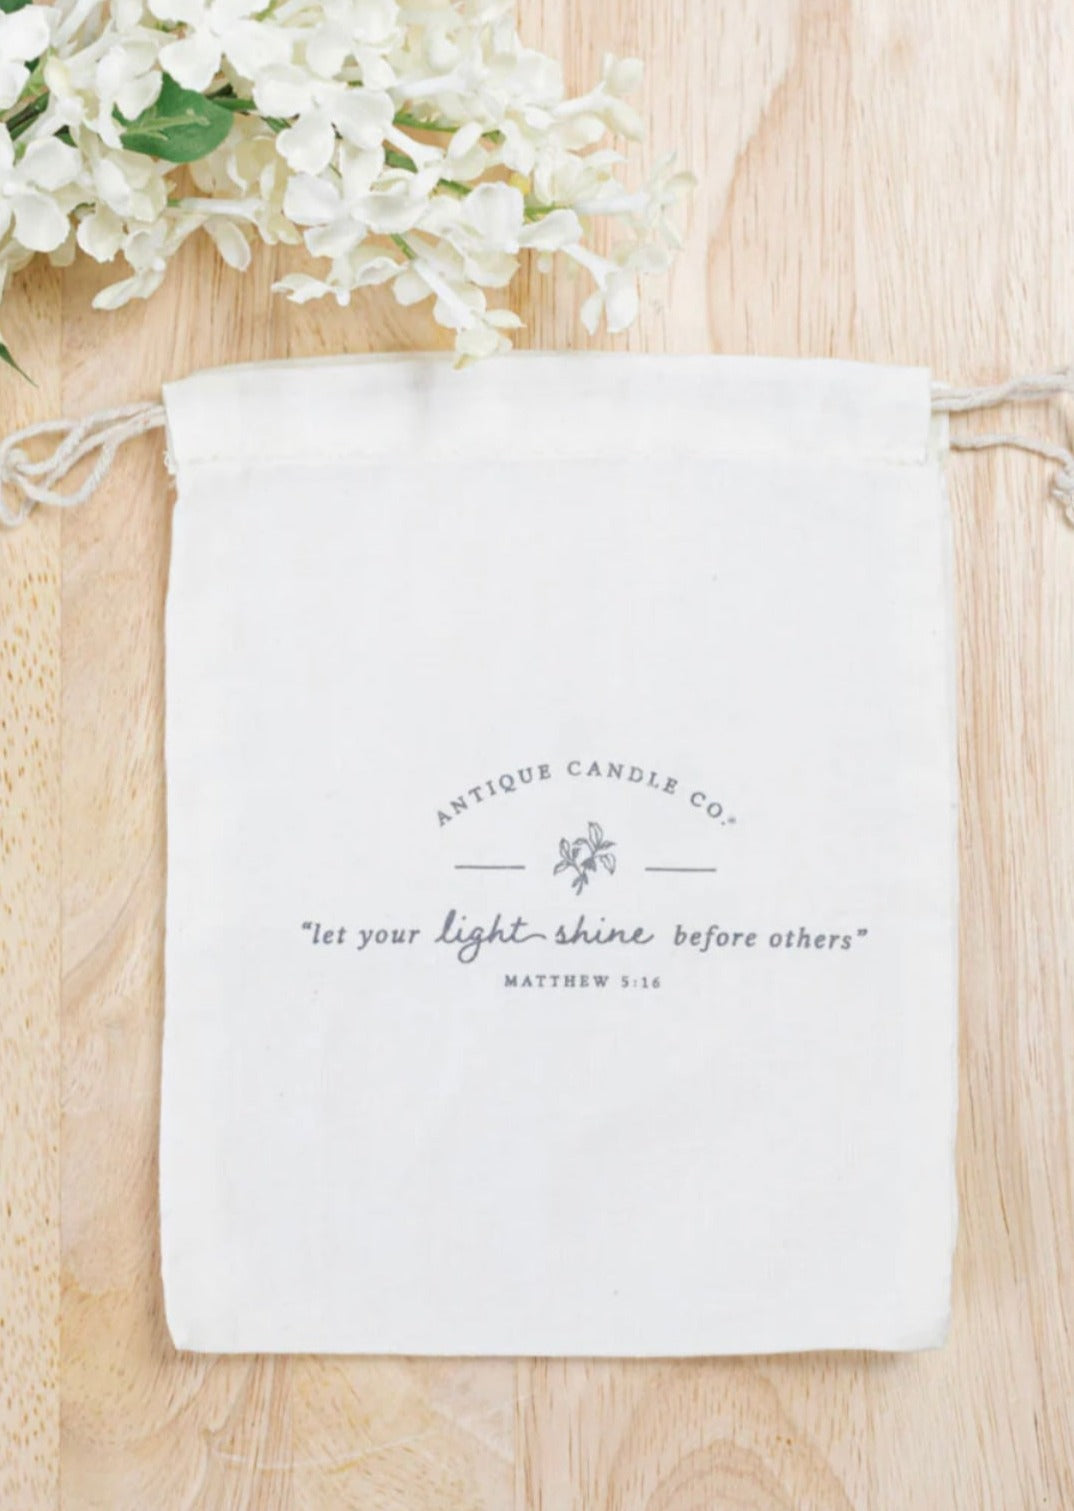 Antique Candle Co. White cotton muslin gift bag with Matthew 5:16 verse; 